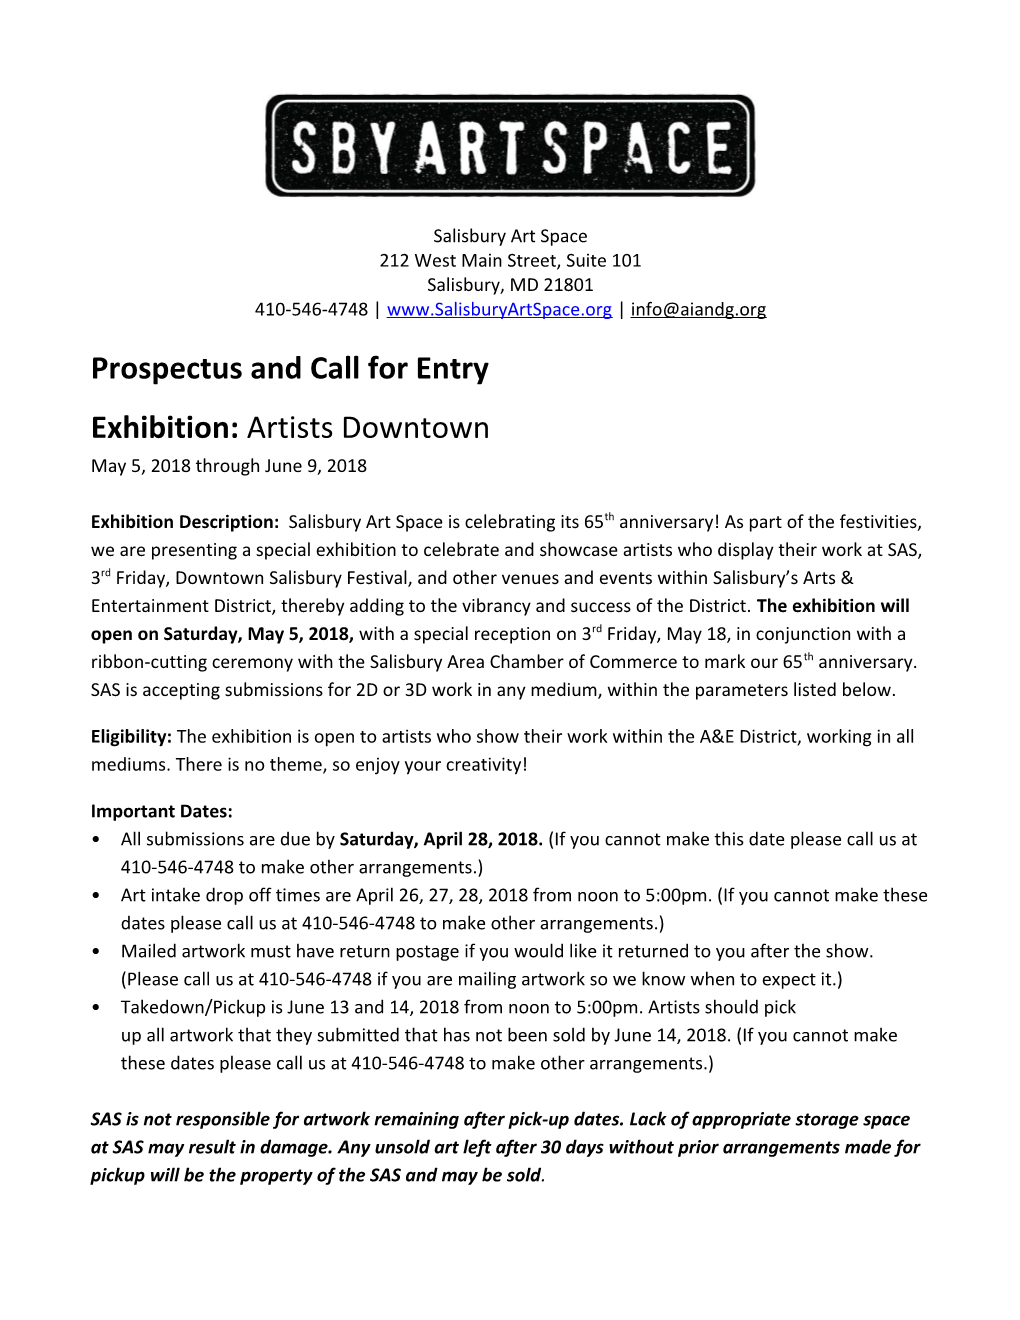 Prospectus and Call for Entry